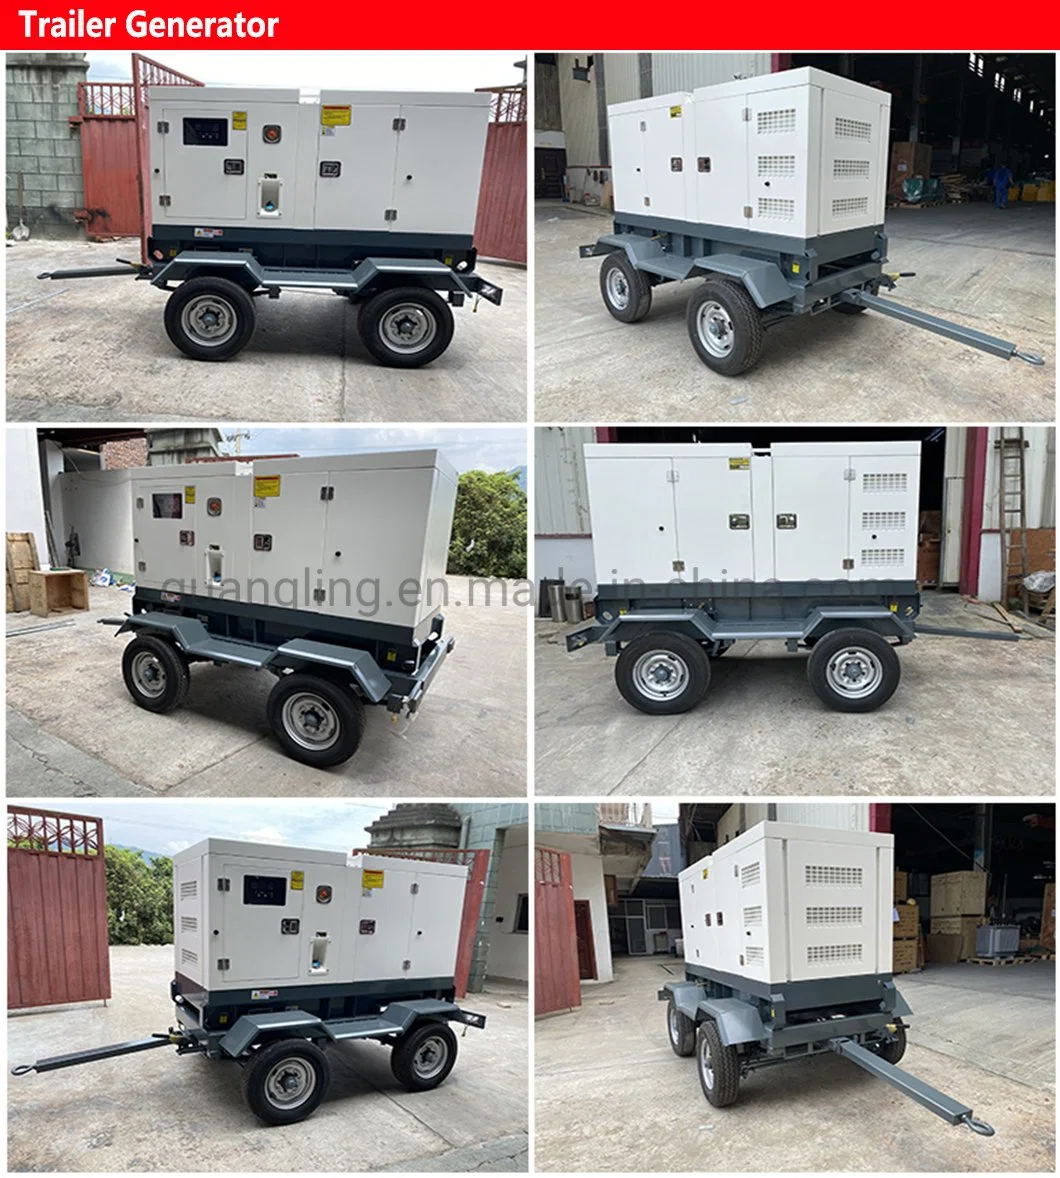 15kw 20kw 25kw 30kw 40kw 50kw 60kw 75kw 80kw 100kw Solar Power Silent Diesel Mobile 3 Phase Electric Power Generator Trailer Price List